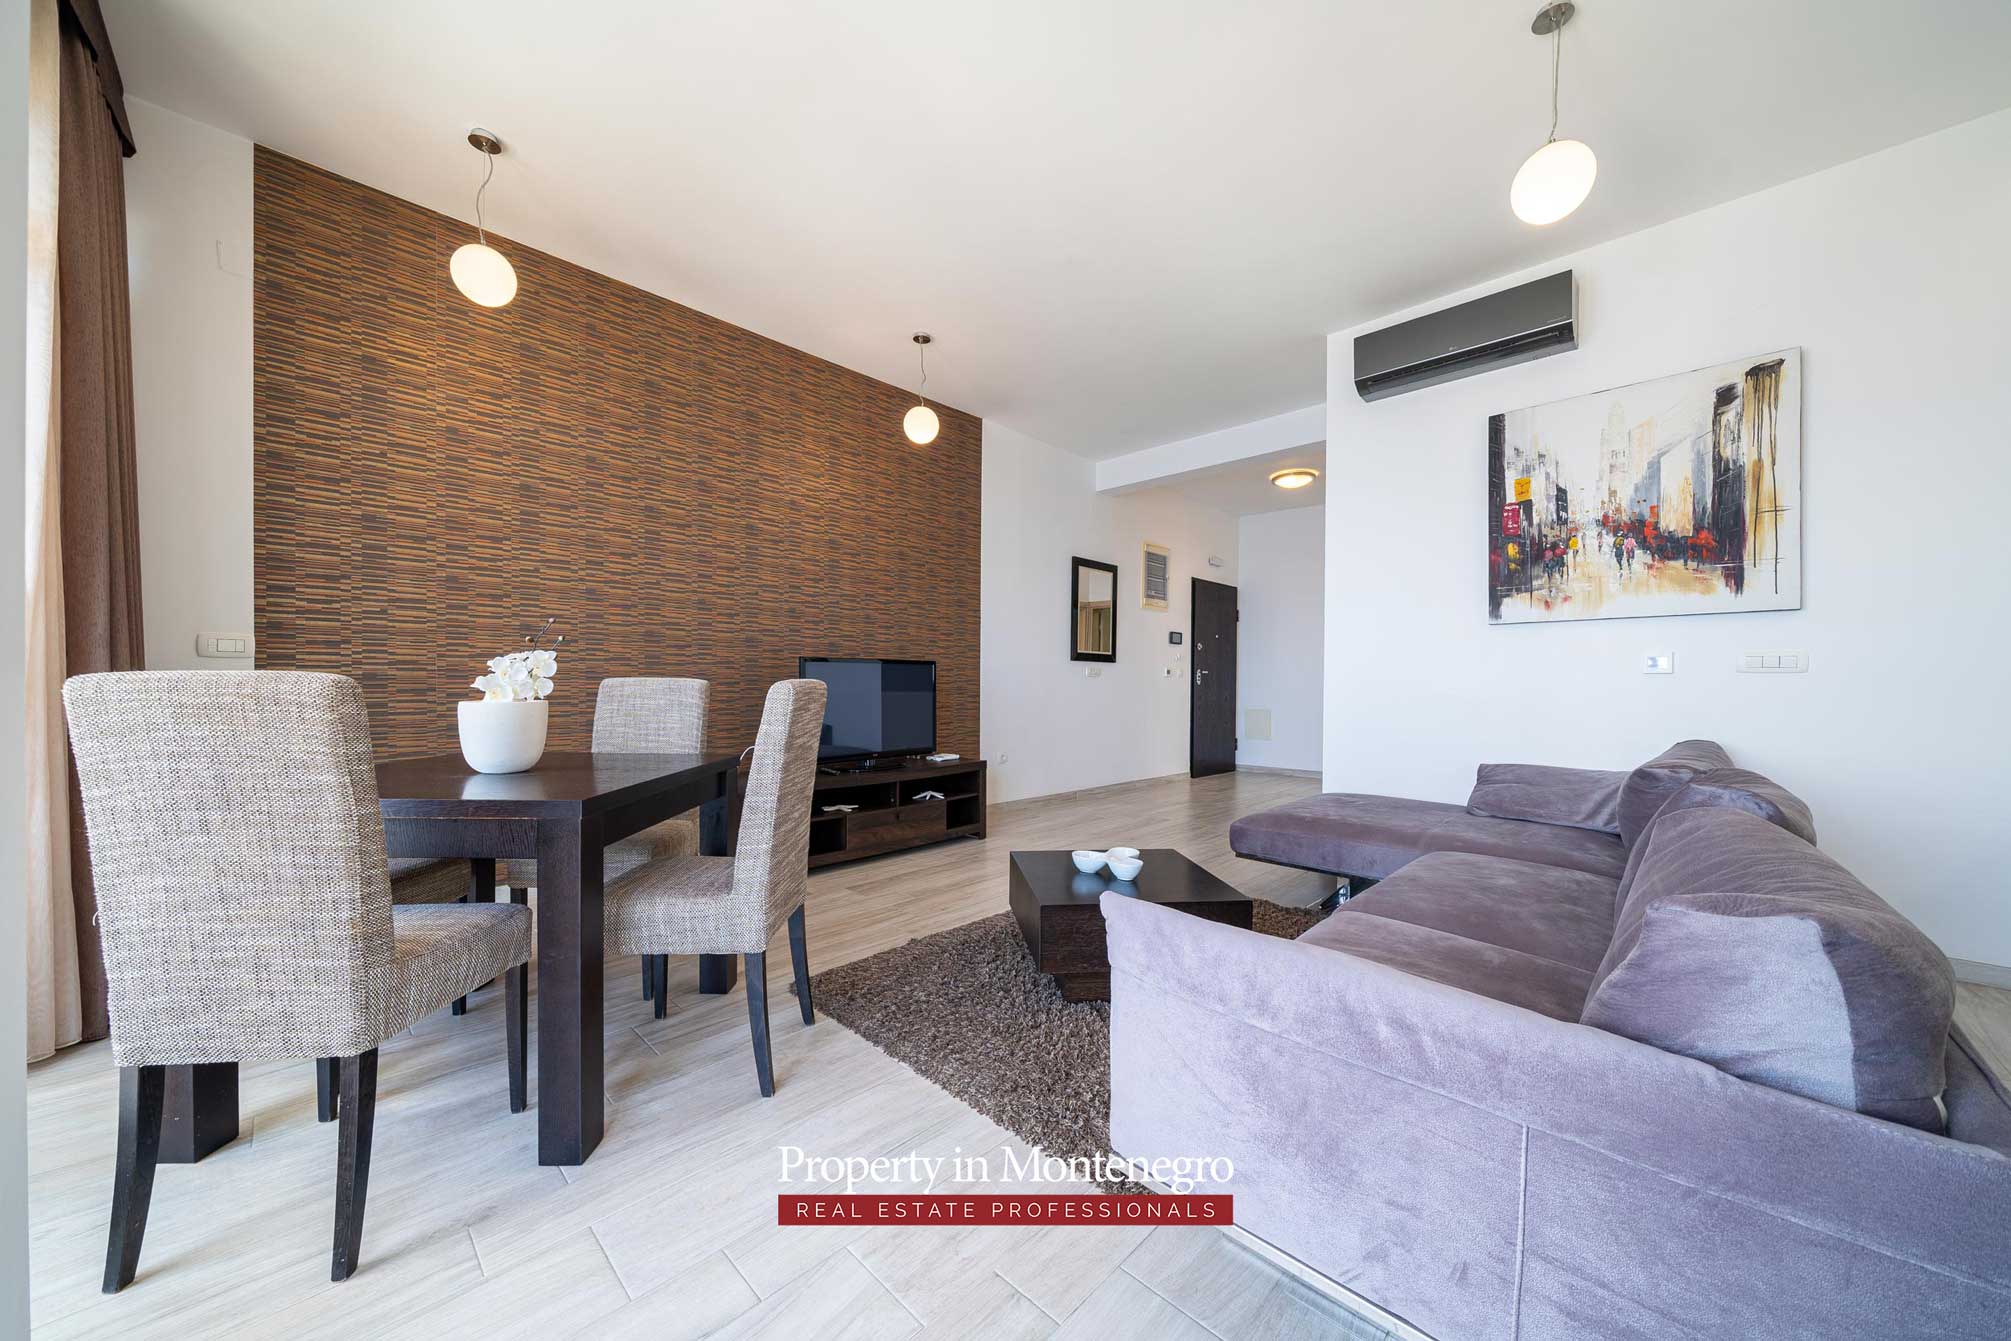 Two bedroom apartment for sale in Bar